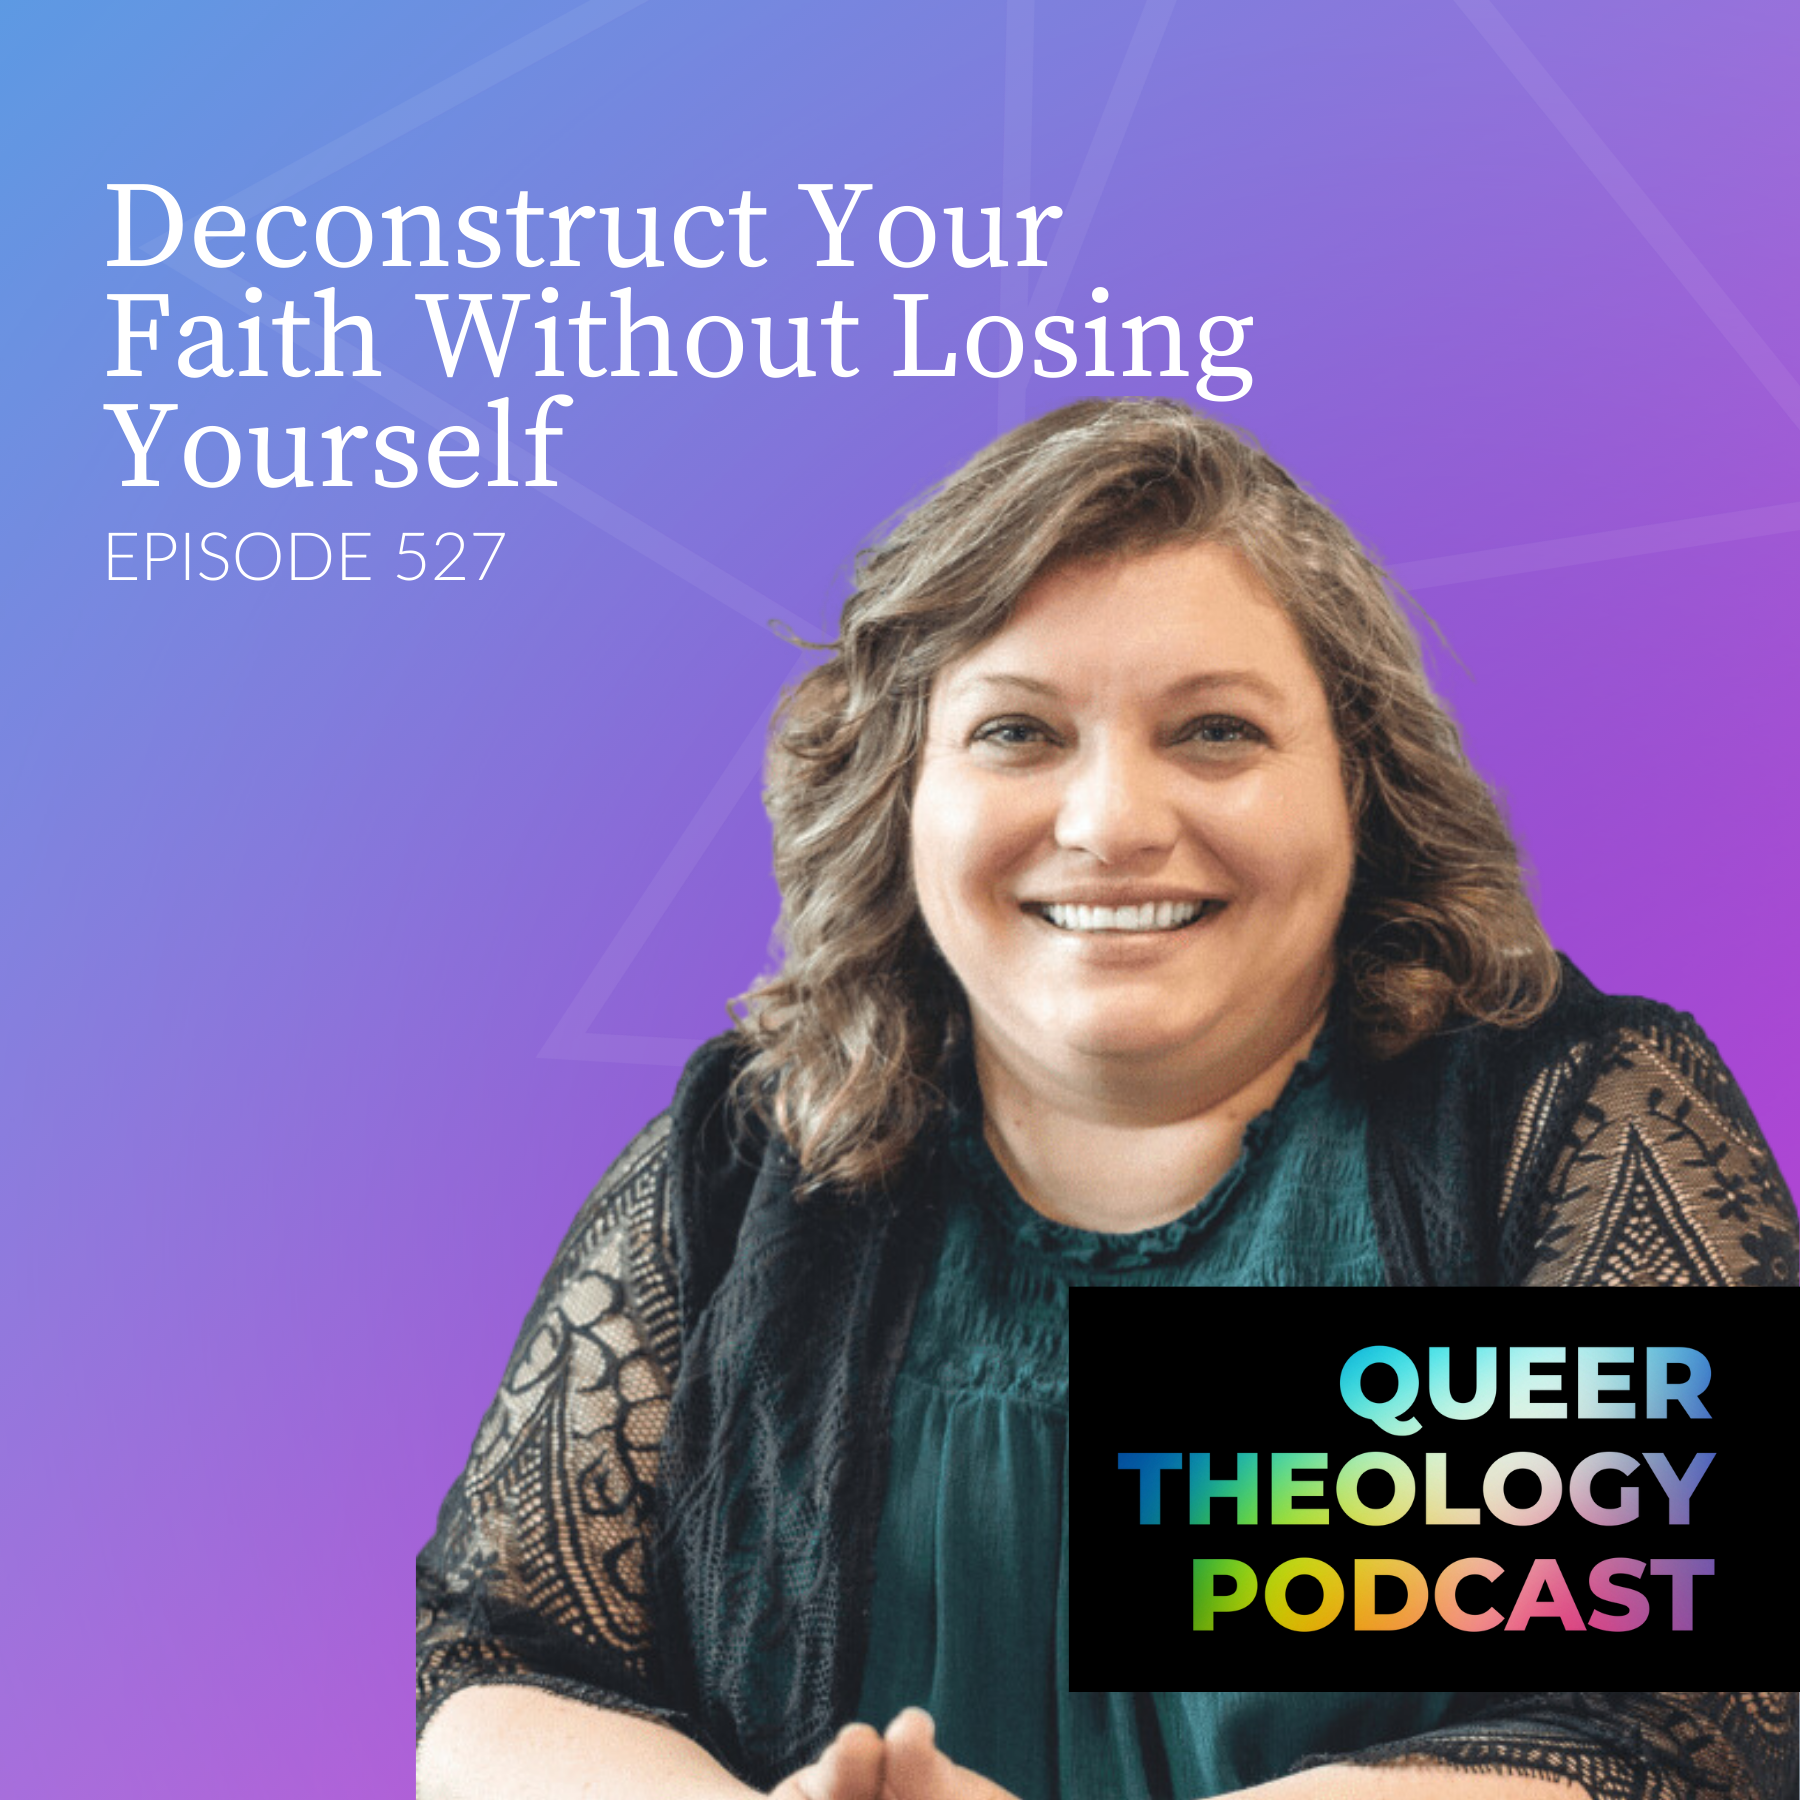 Deconstruct Your Faith Without Losing Yourself with Angela Herrington